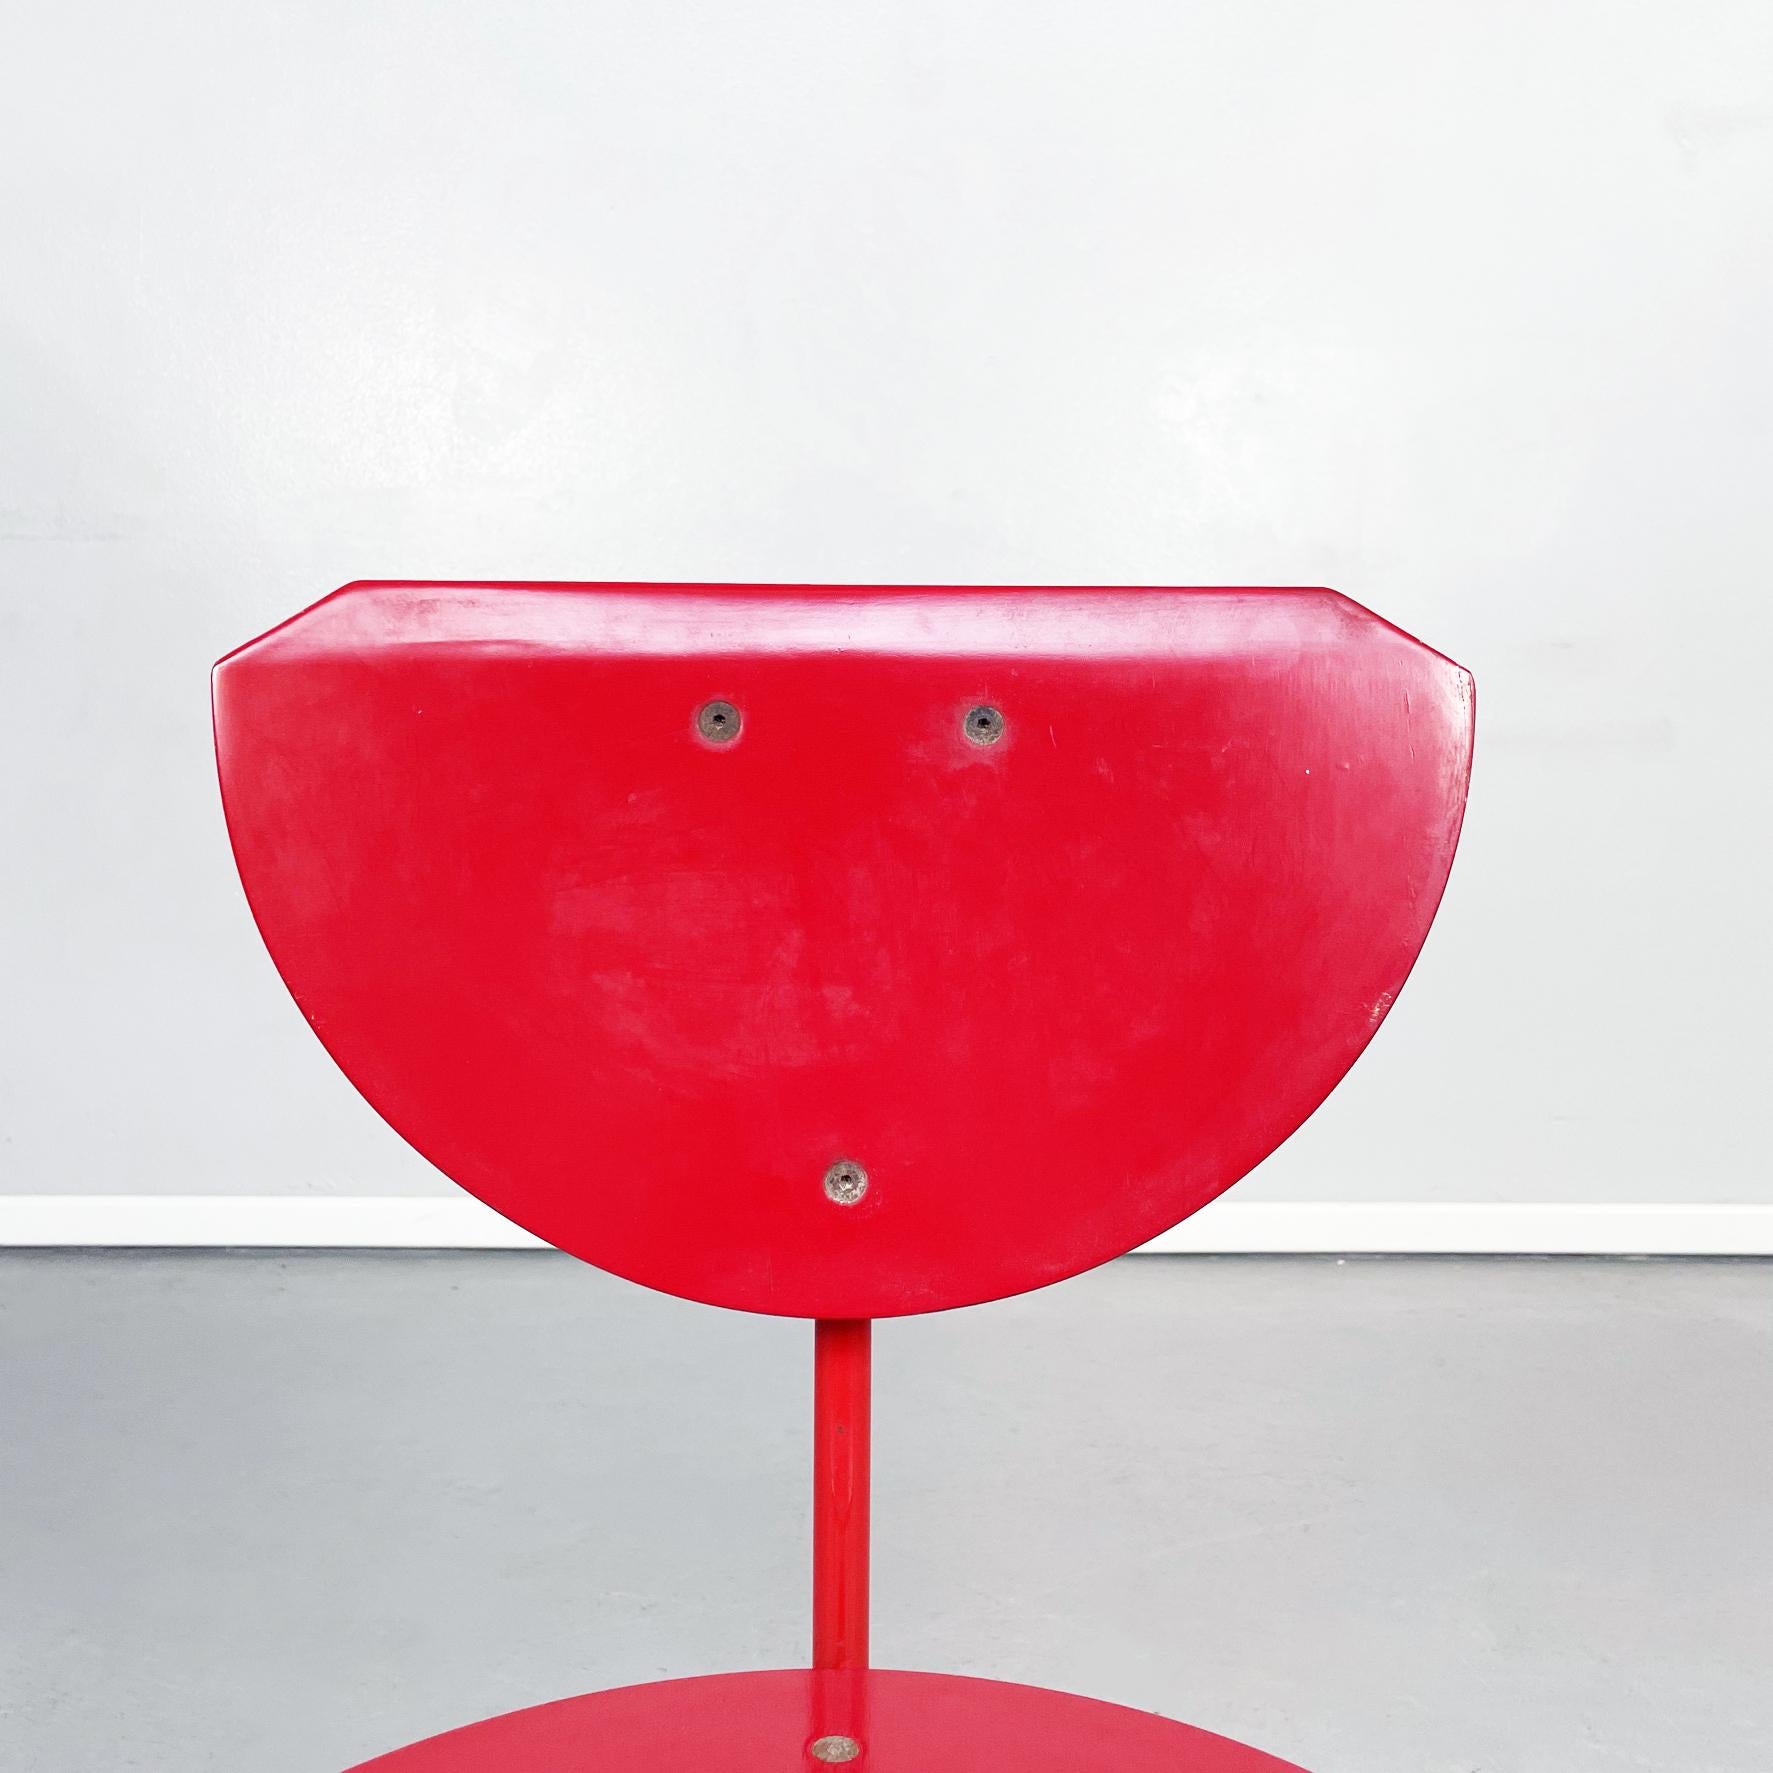 Italian Mid-Century Red Wood and Metal Alien Chair by Forcolini for Alias, 1980s For Sale 1